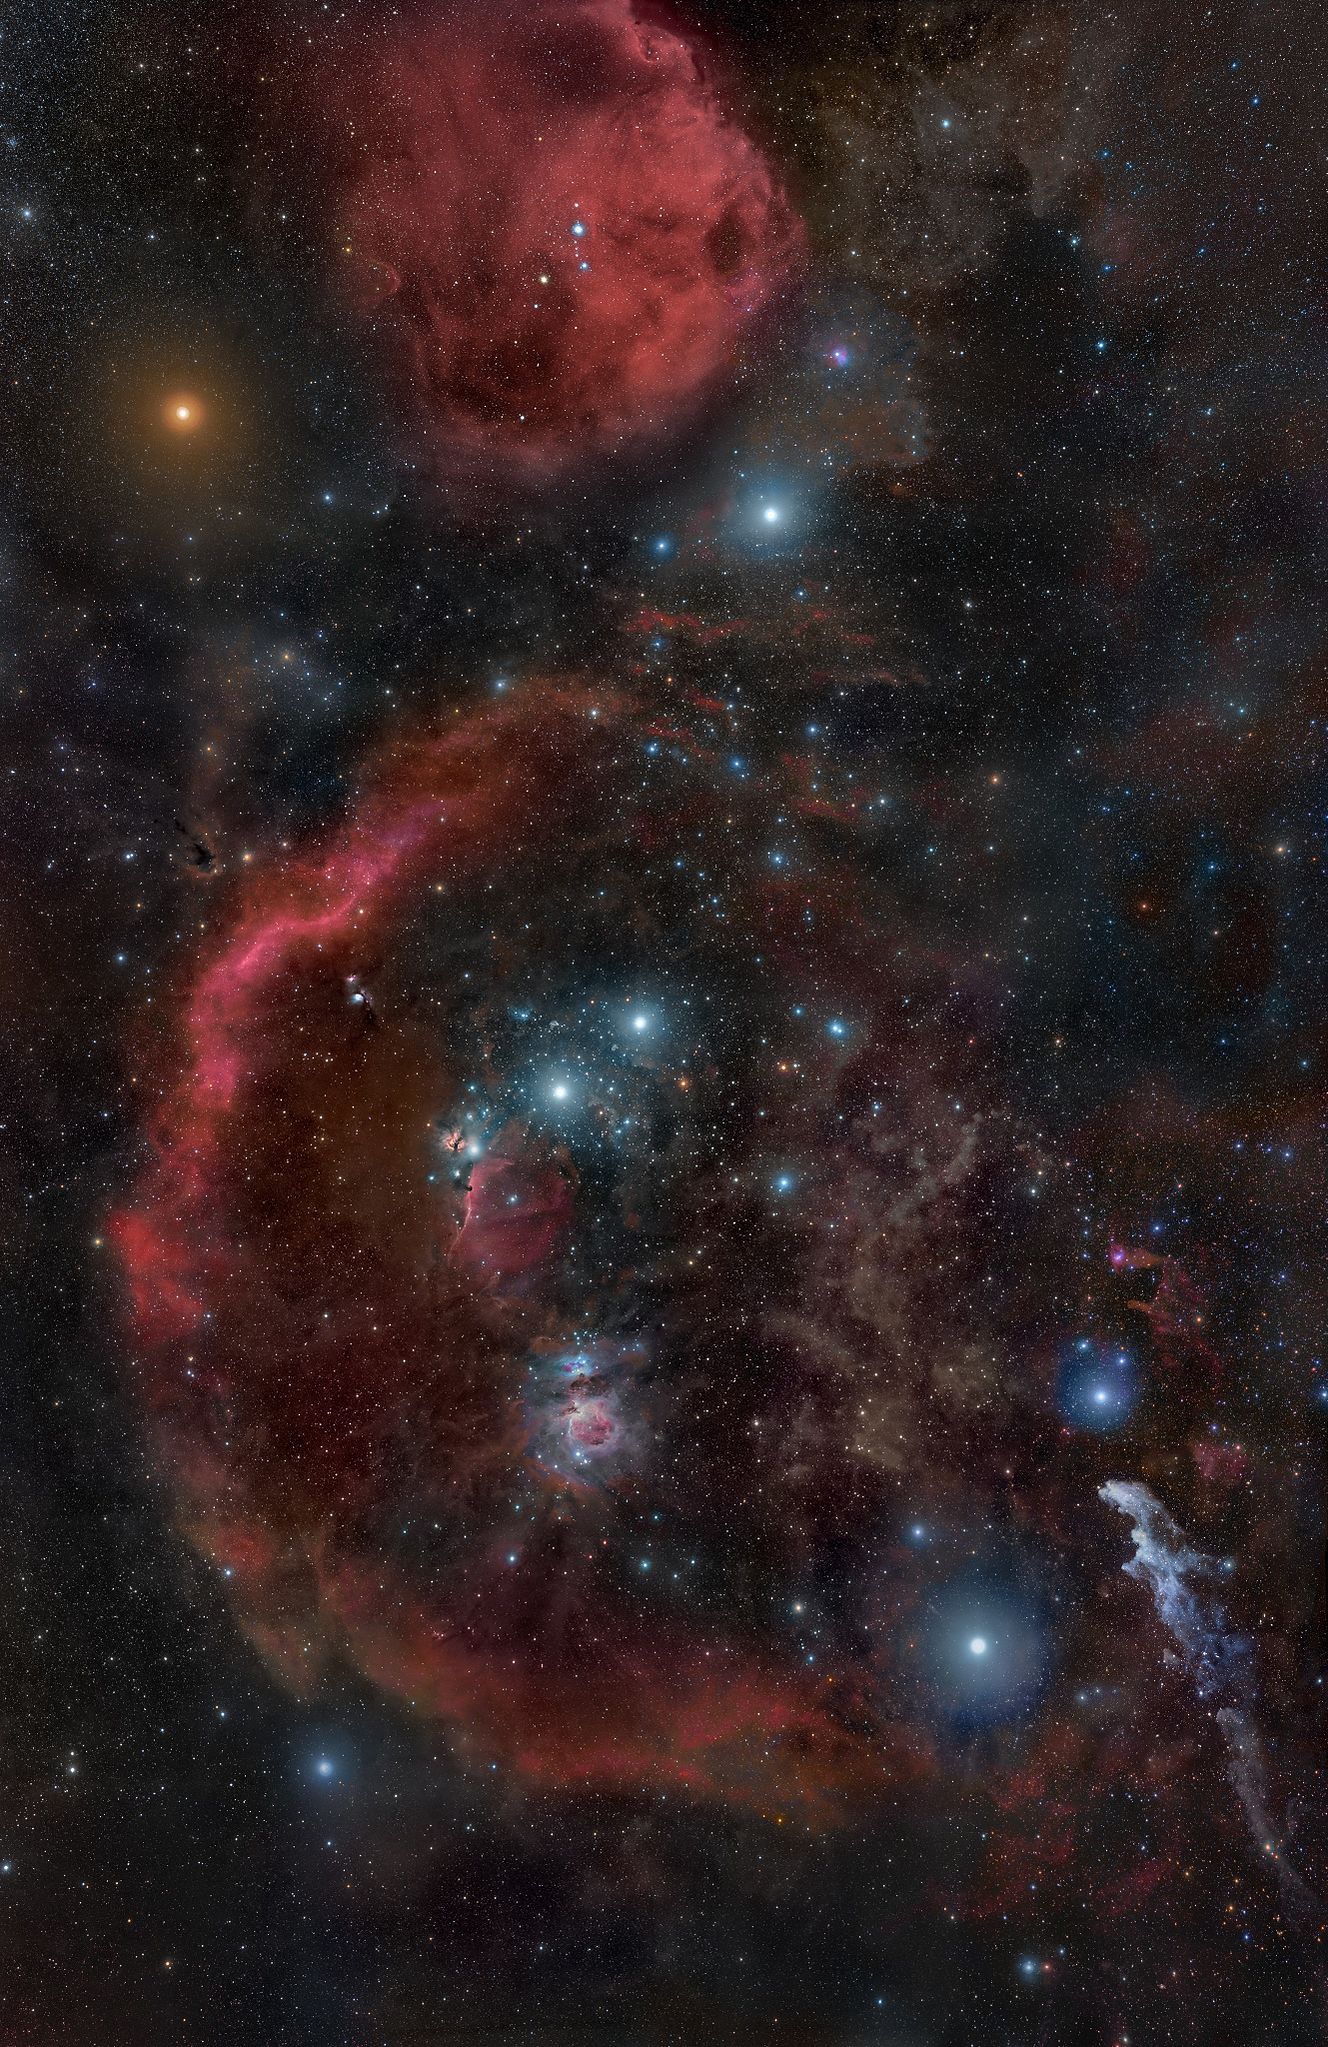 EarthSky | Orion the Hunter, the world's most recognizable constellation